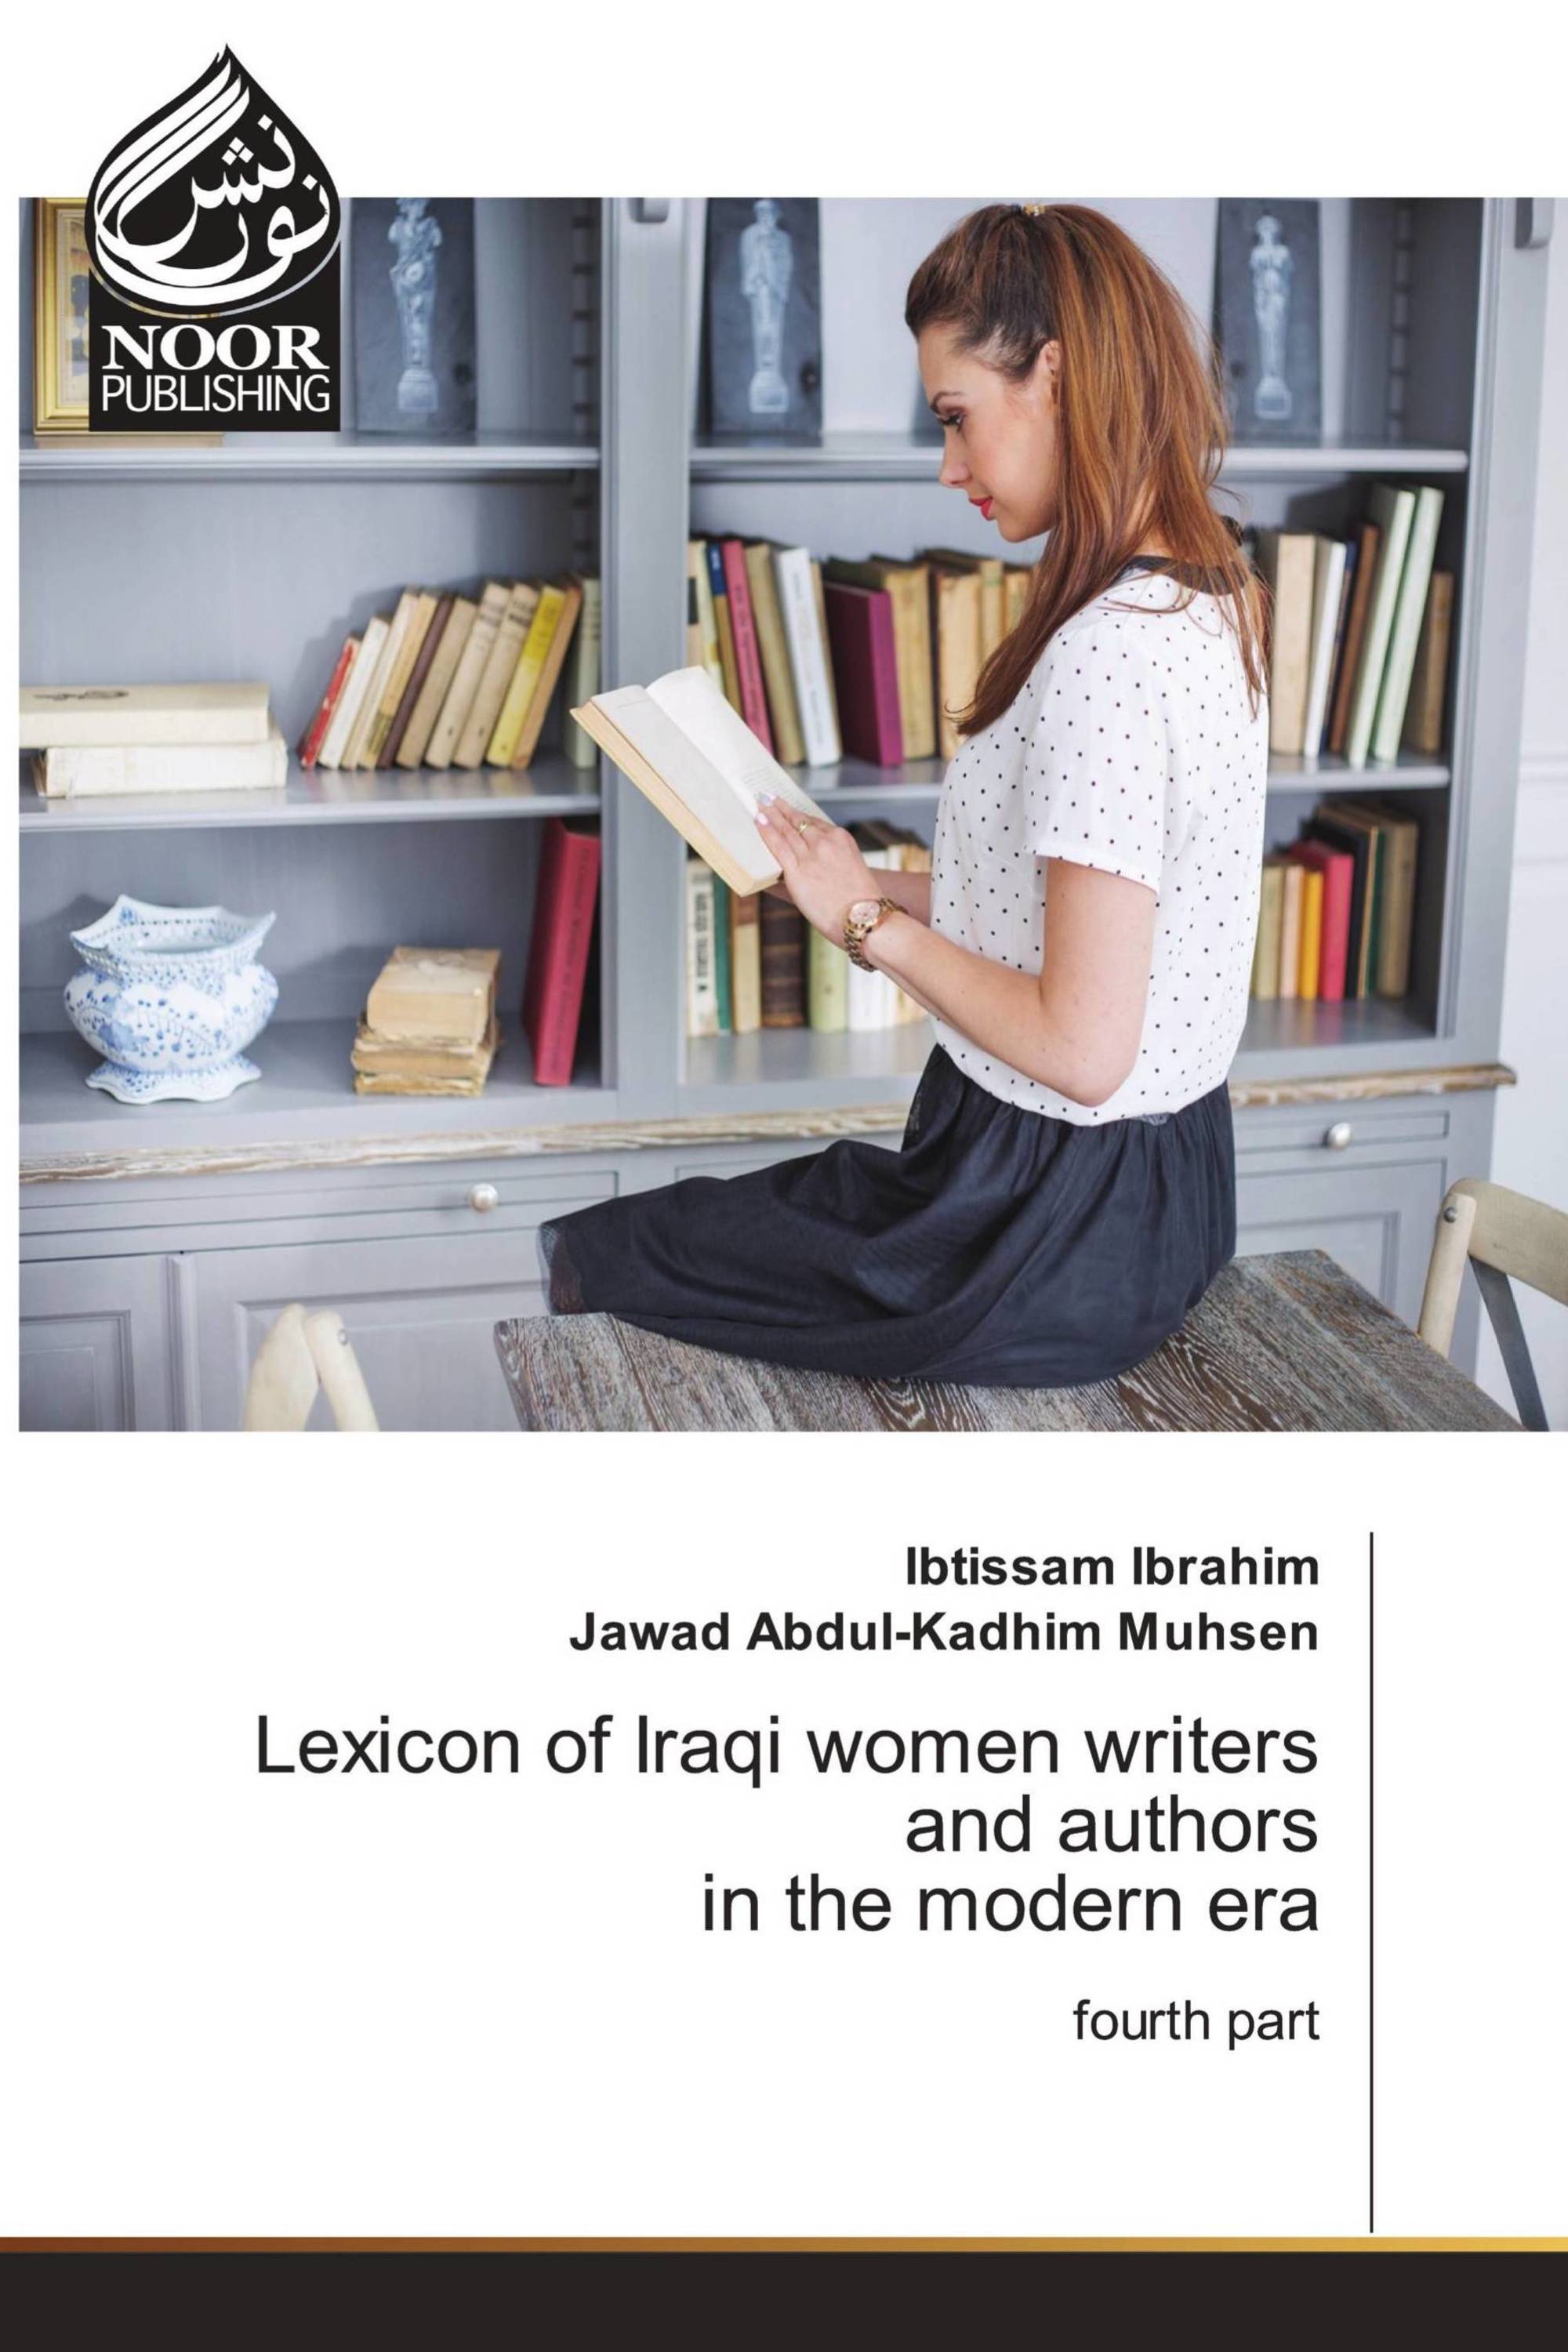 Lexicon of Iraqi women writers and authors in the modern era